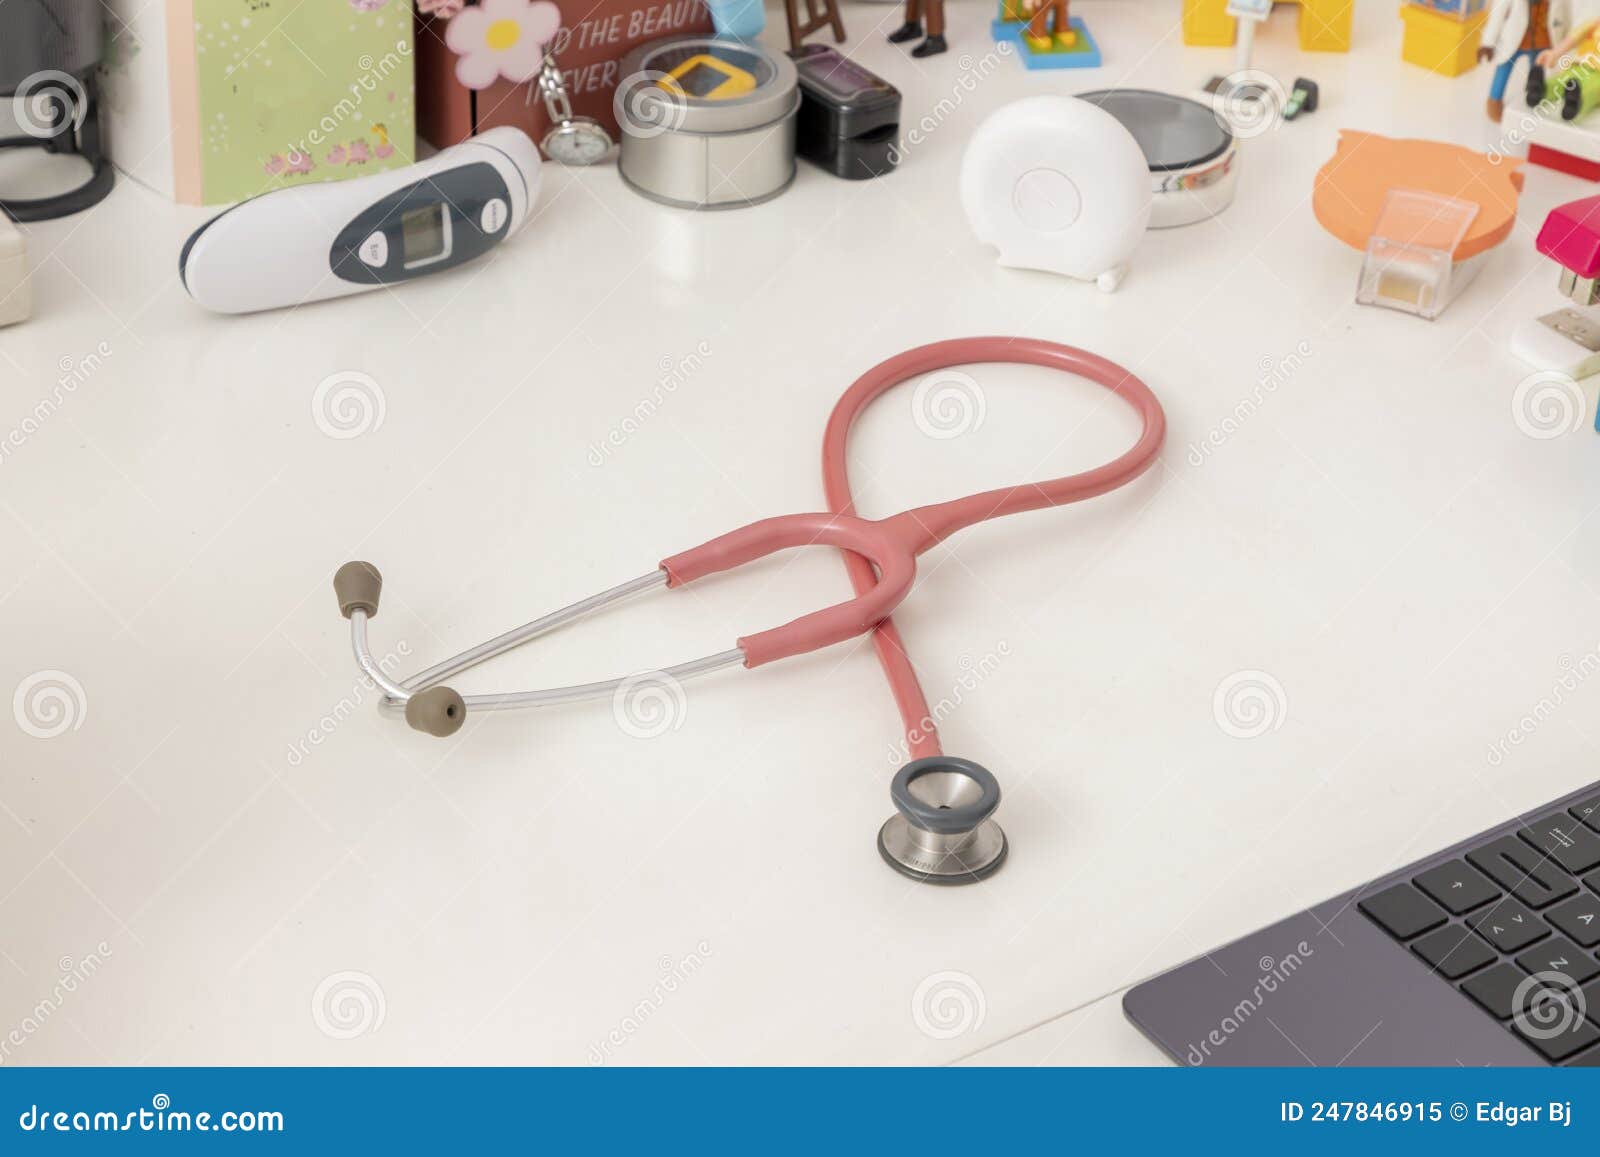 stethoscope and pediatric equipment, on the desk of a pediatric office